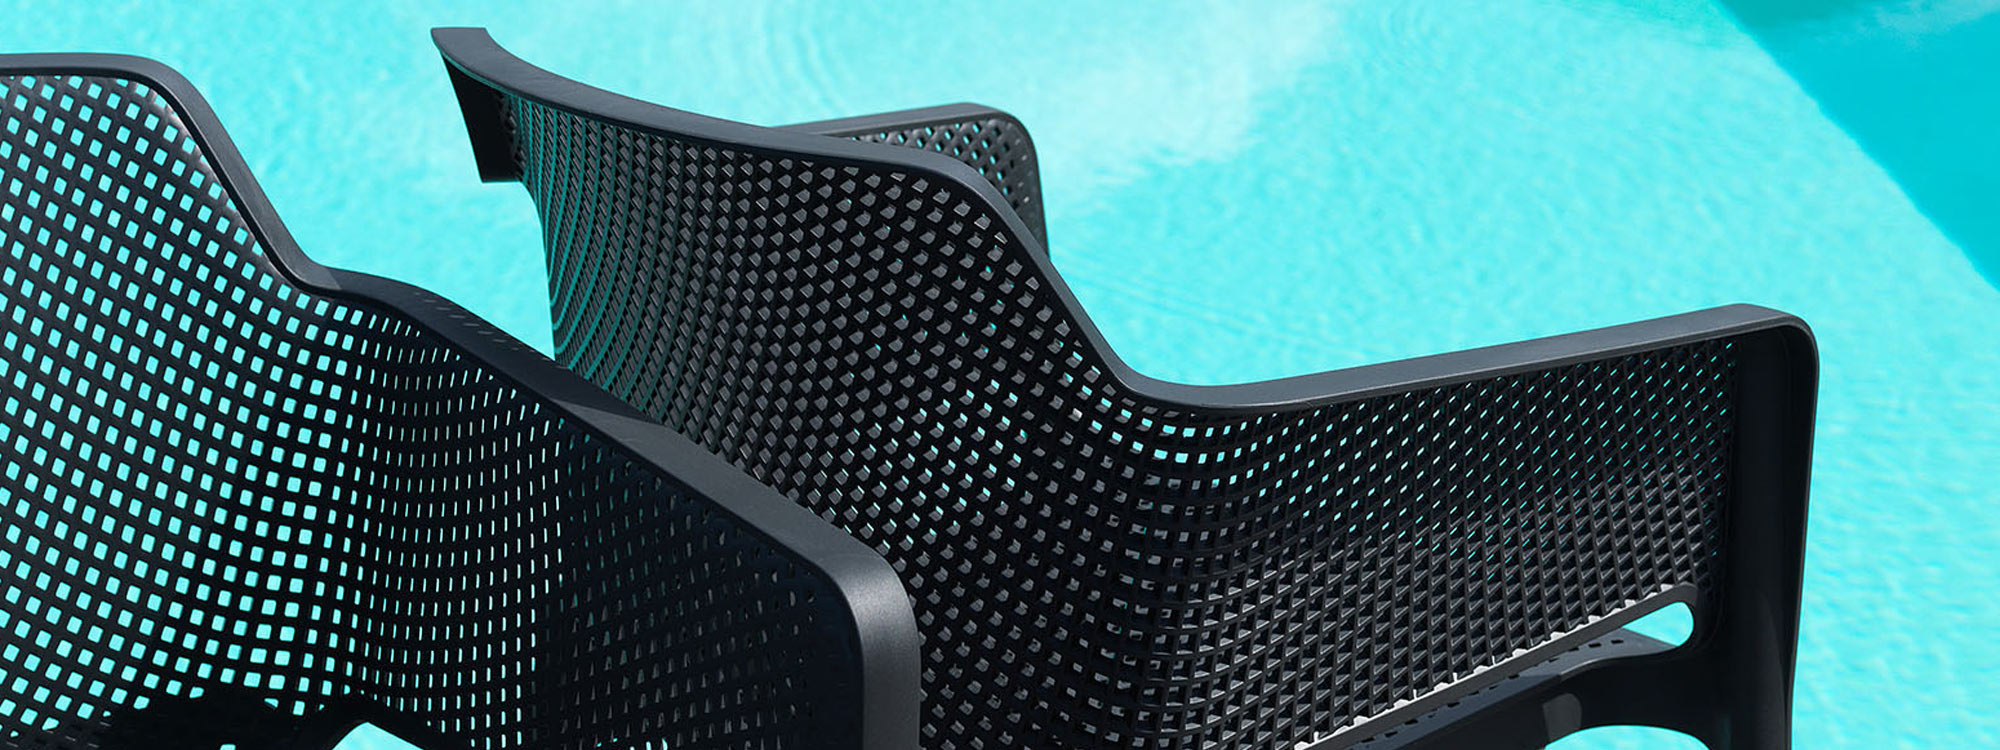 Detail Of Back Of Net OUTDOOR DINING CHAIR Is A STACKABLE Garden Chair In HIGH QUALITY Hospitality Furniture MATERIALS By Nardi EXTERIOR CONTRACT FURNITURE Italy